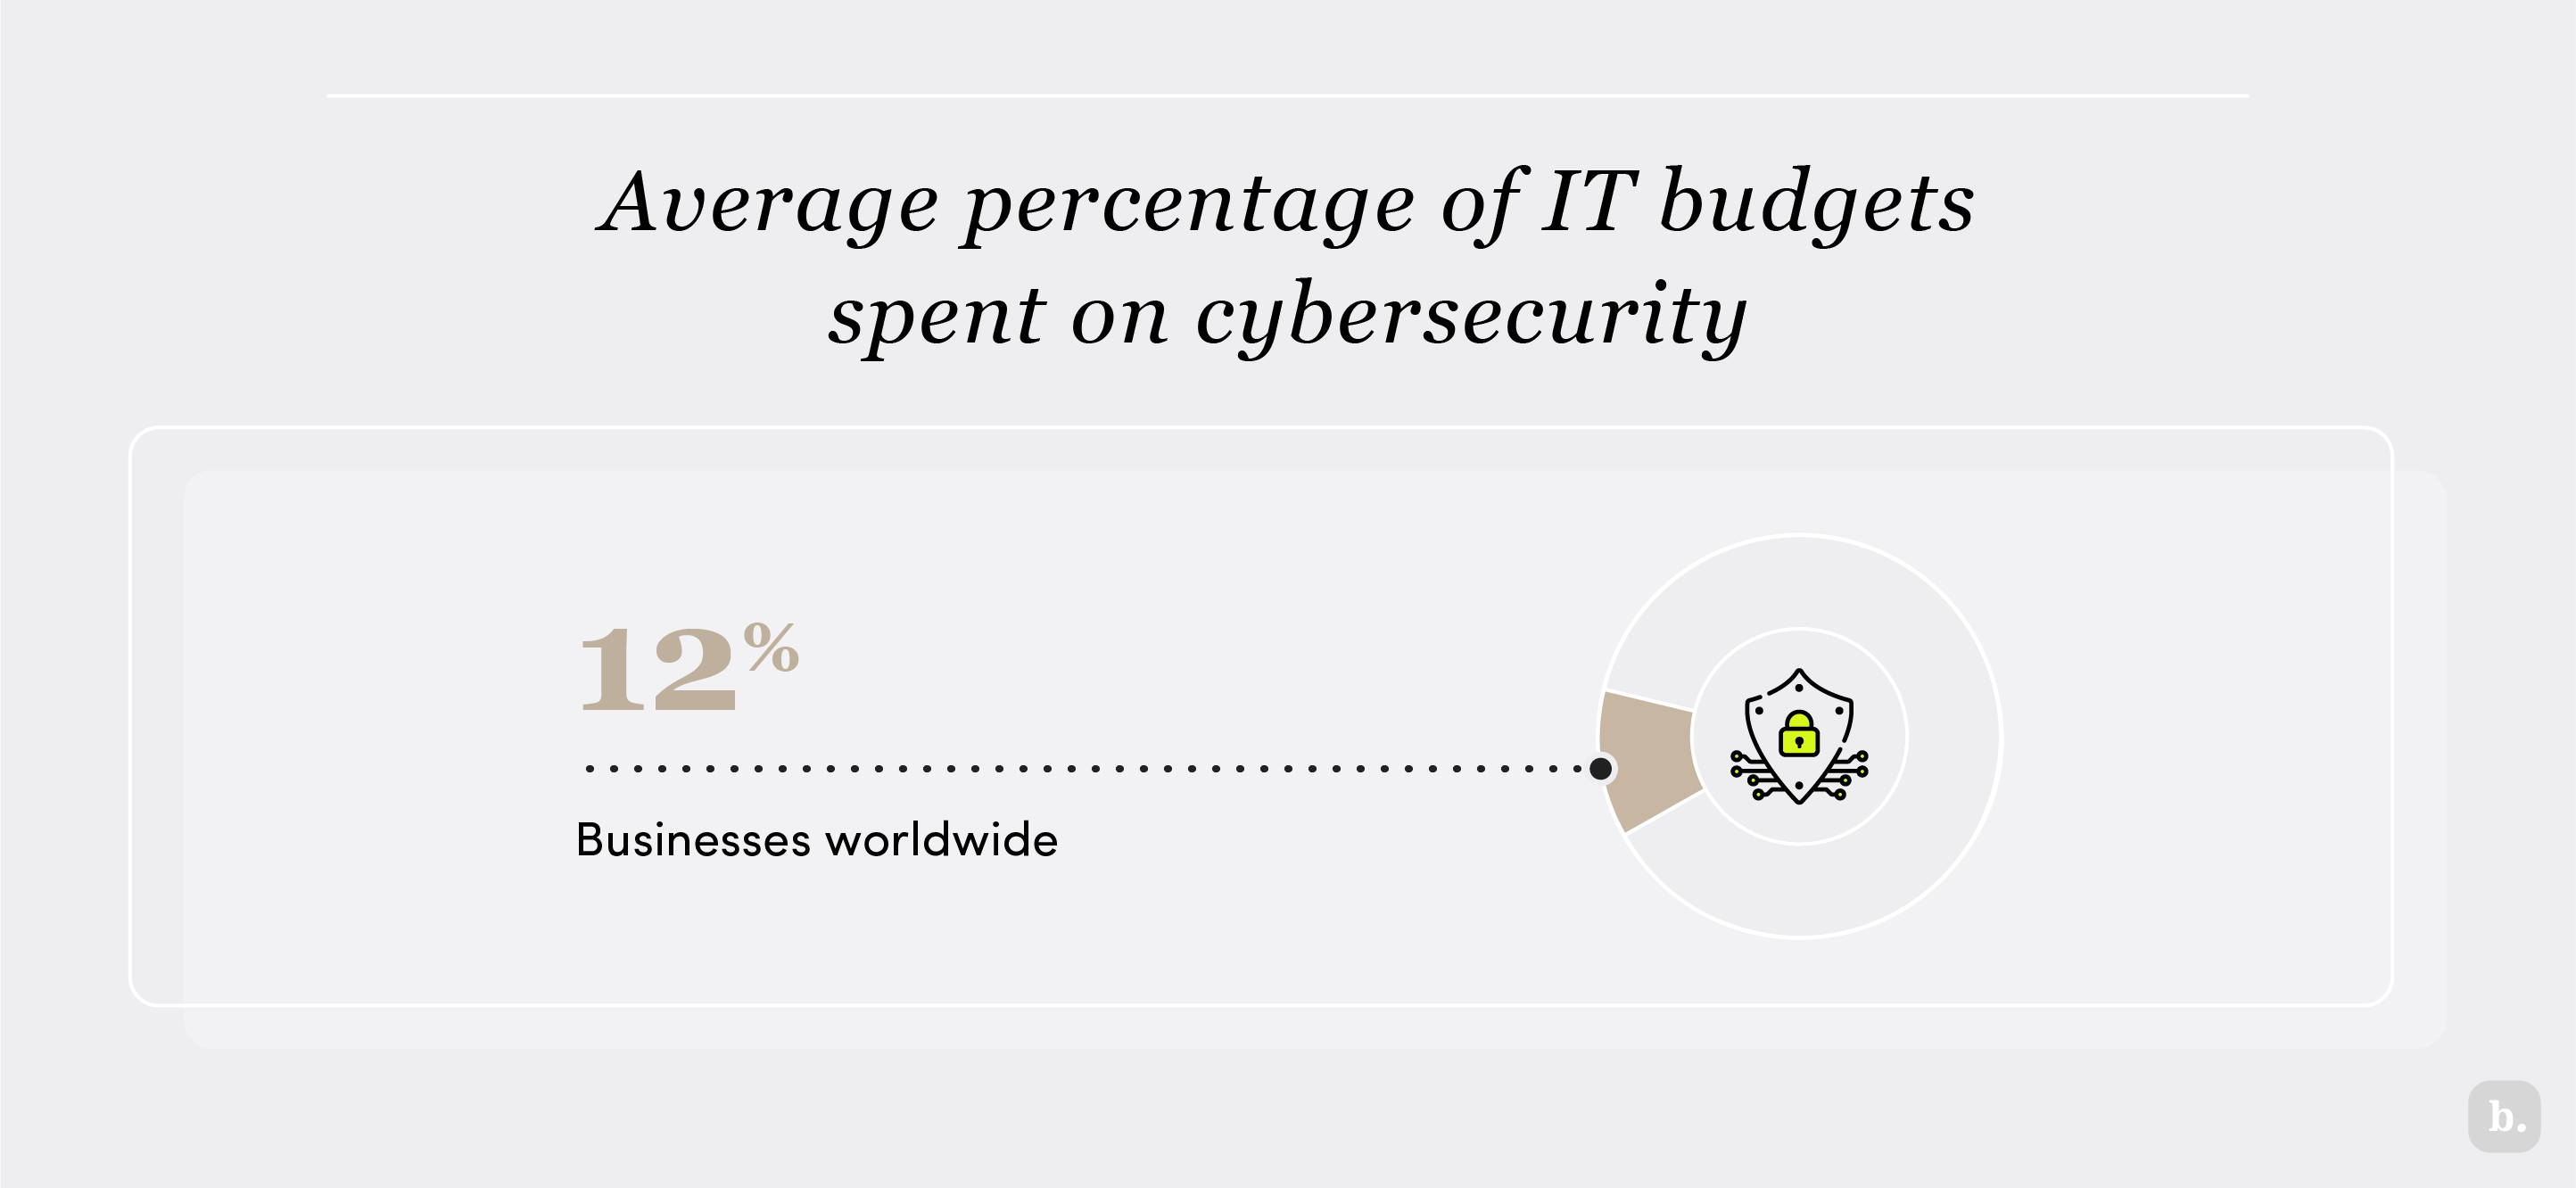 Average percentage of IT budgets spent on cybersecurity